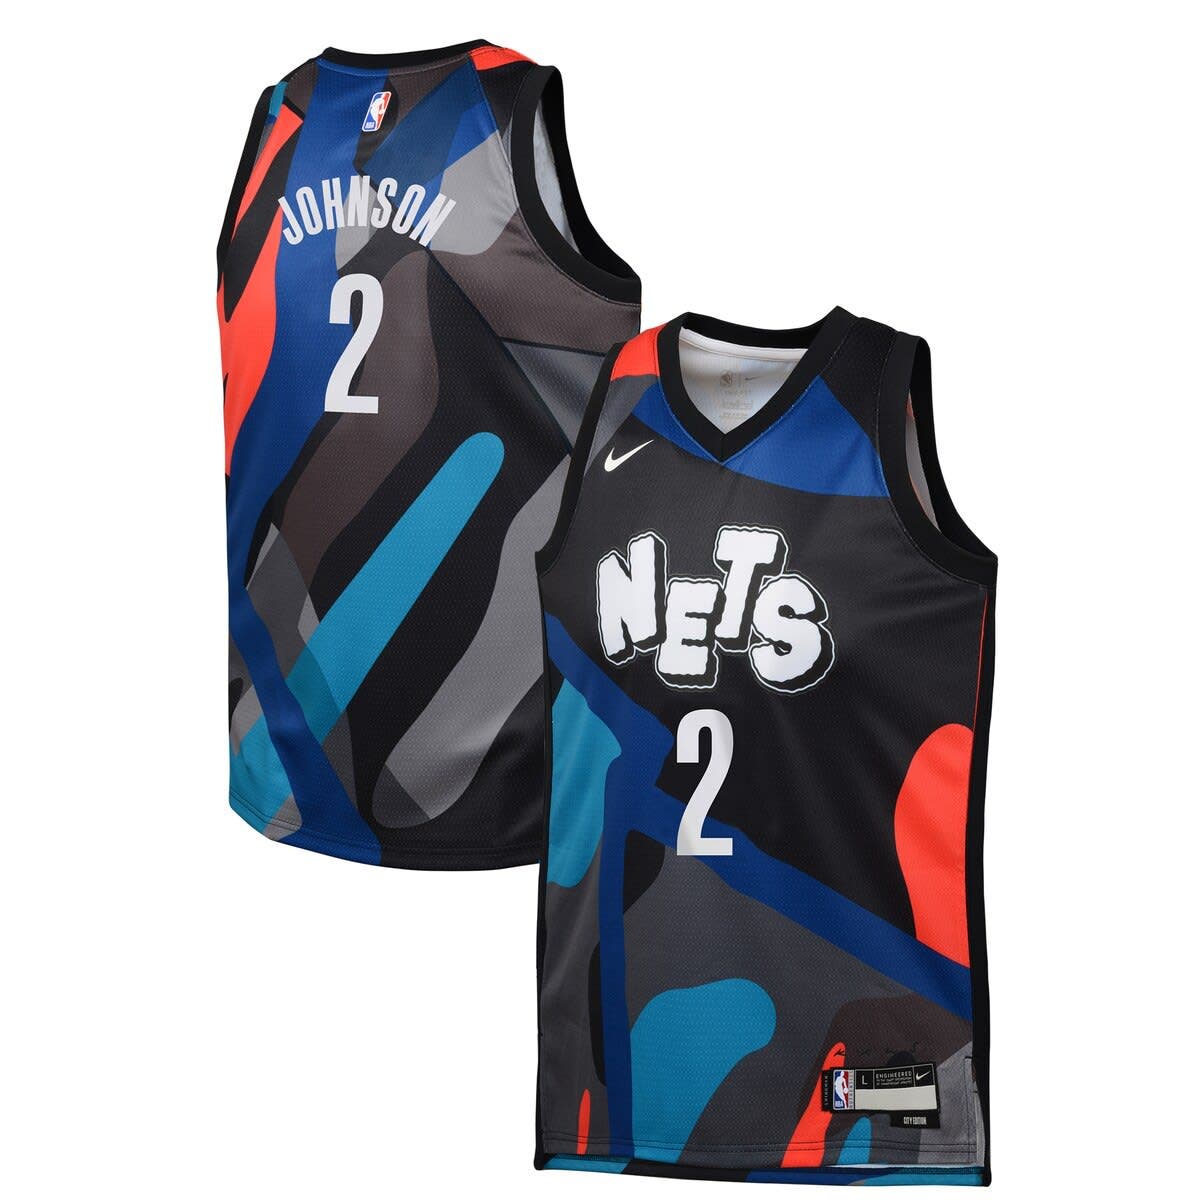 Armour-Davis Jalyn youth jersey